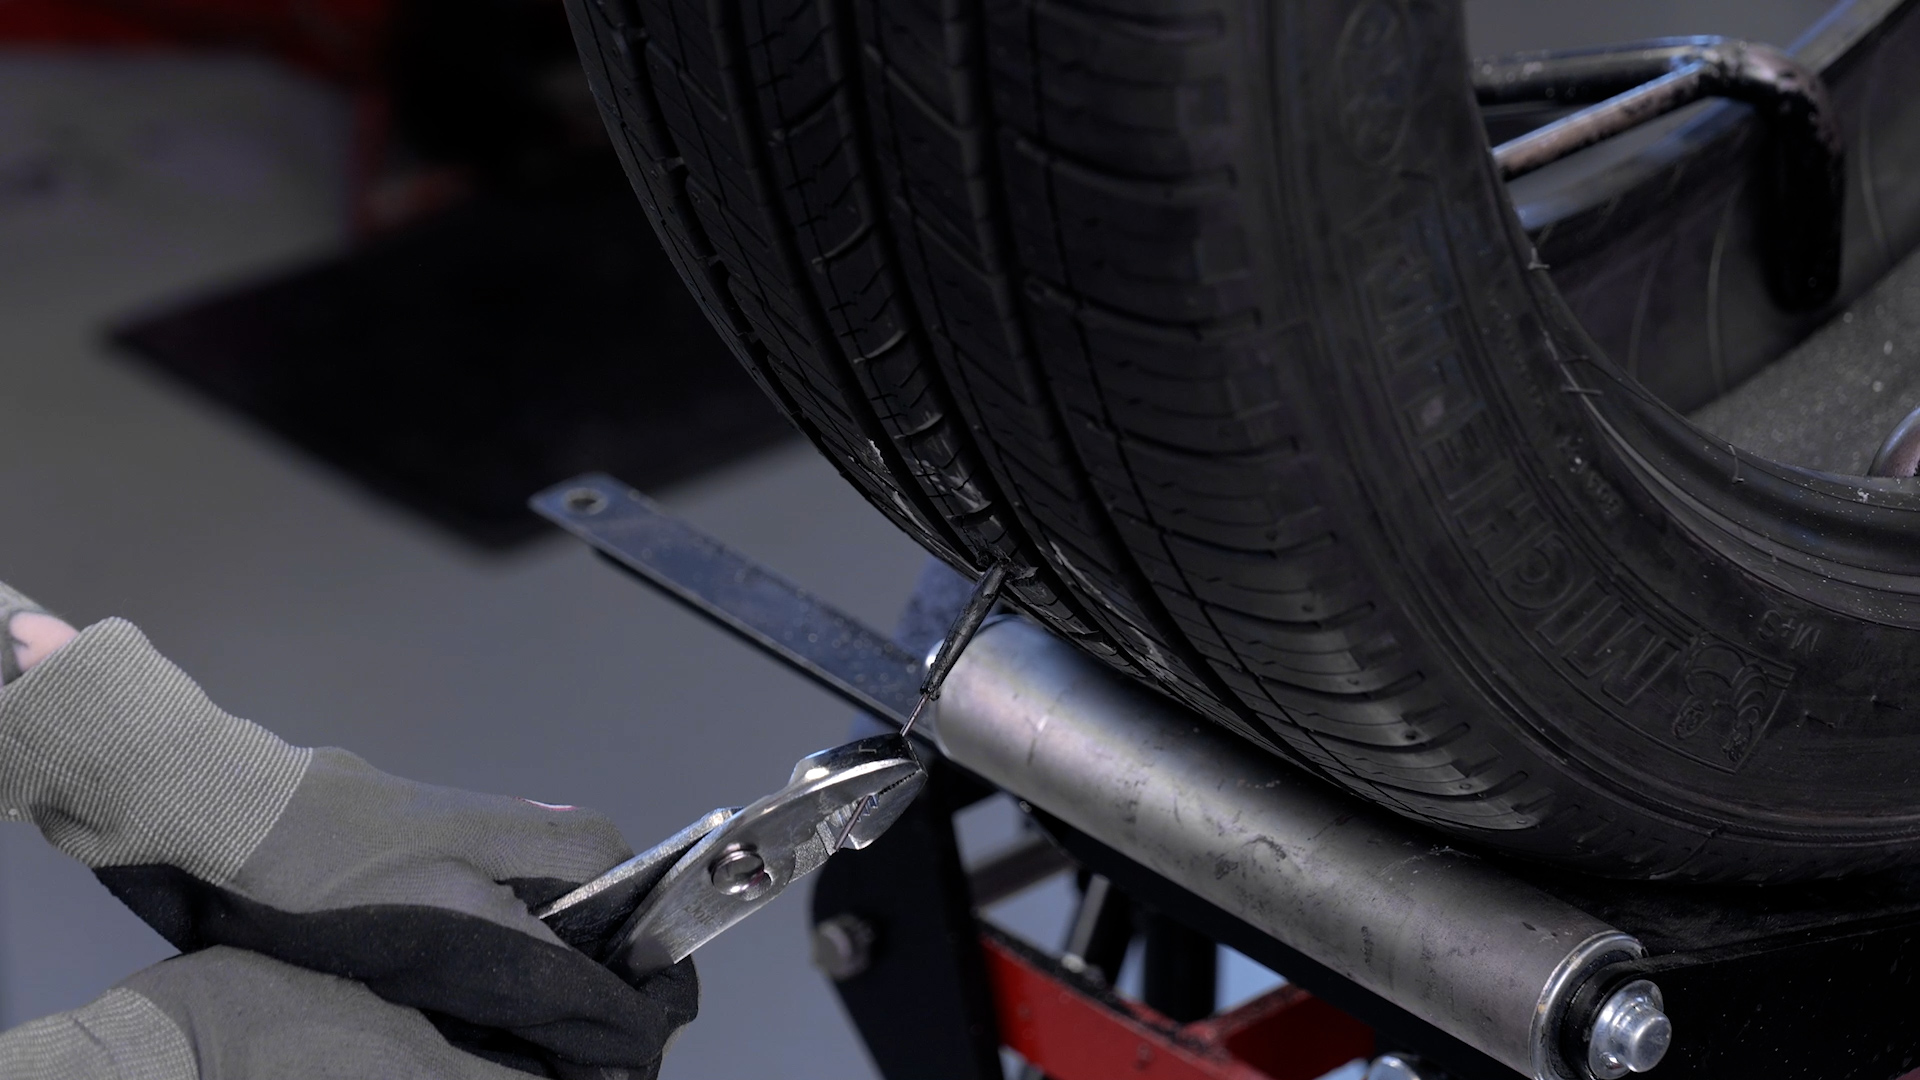 Use the lead wire to pull the repair through the tire